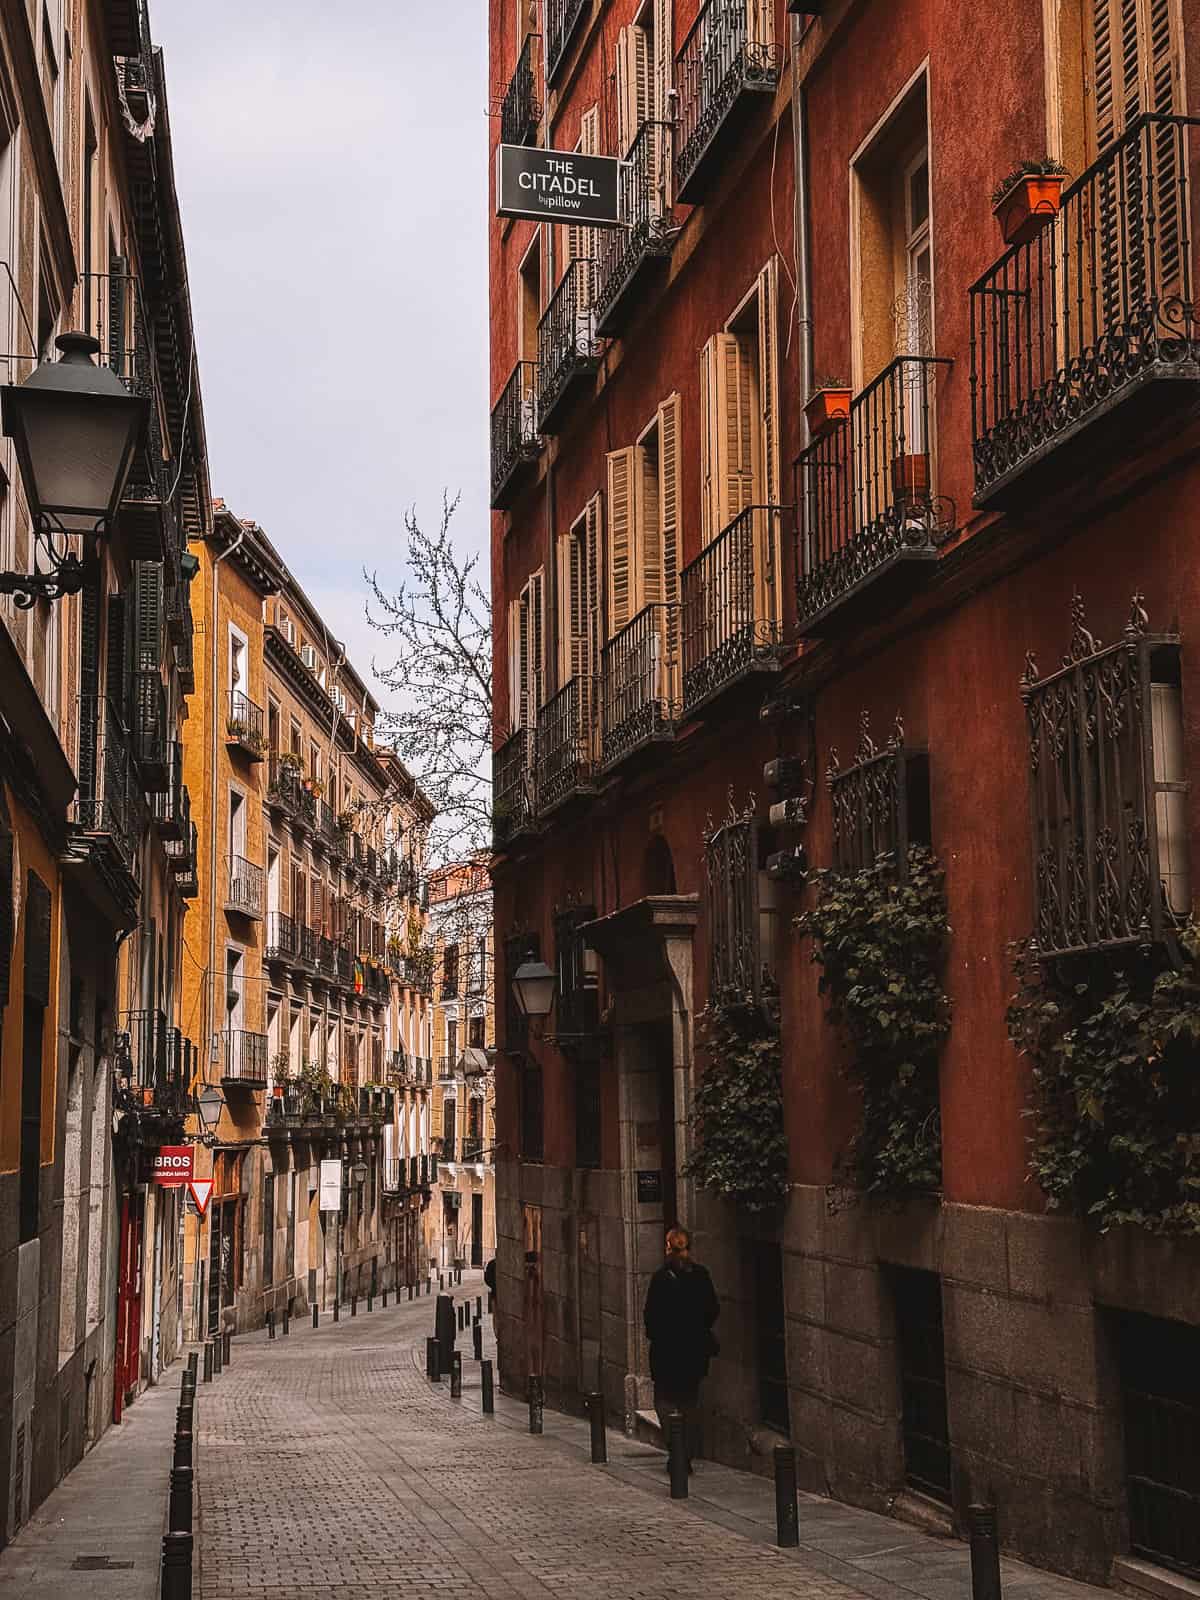 A quiet, cobblestone street in Madrid flanked by traditional buildings with wrought-iron balconies and vibrant facades, exuding the historic charm of the city's old quarters.